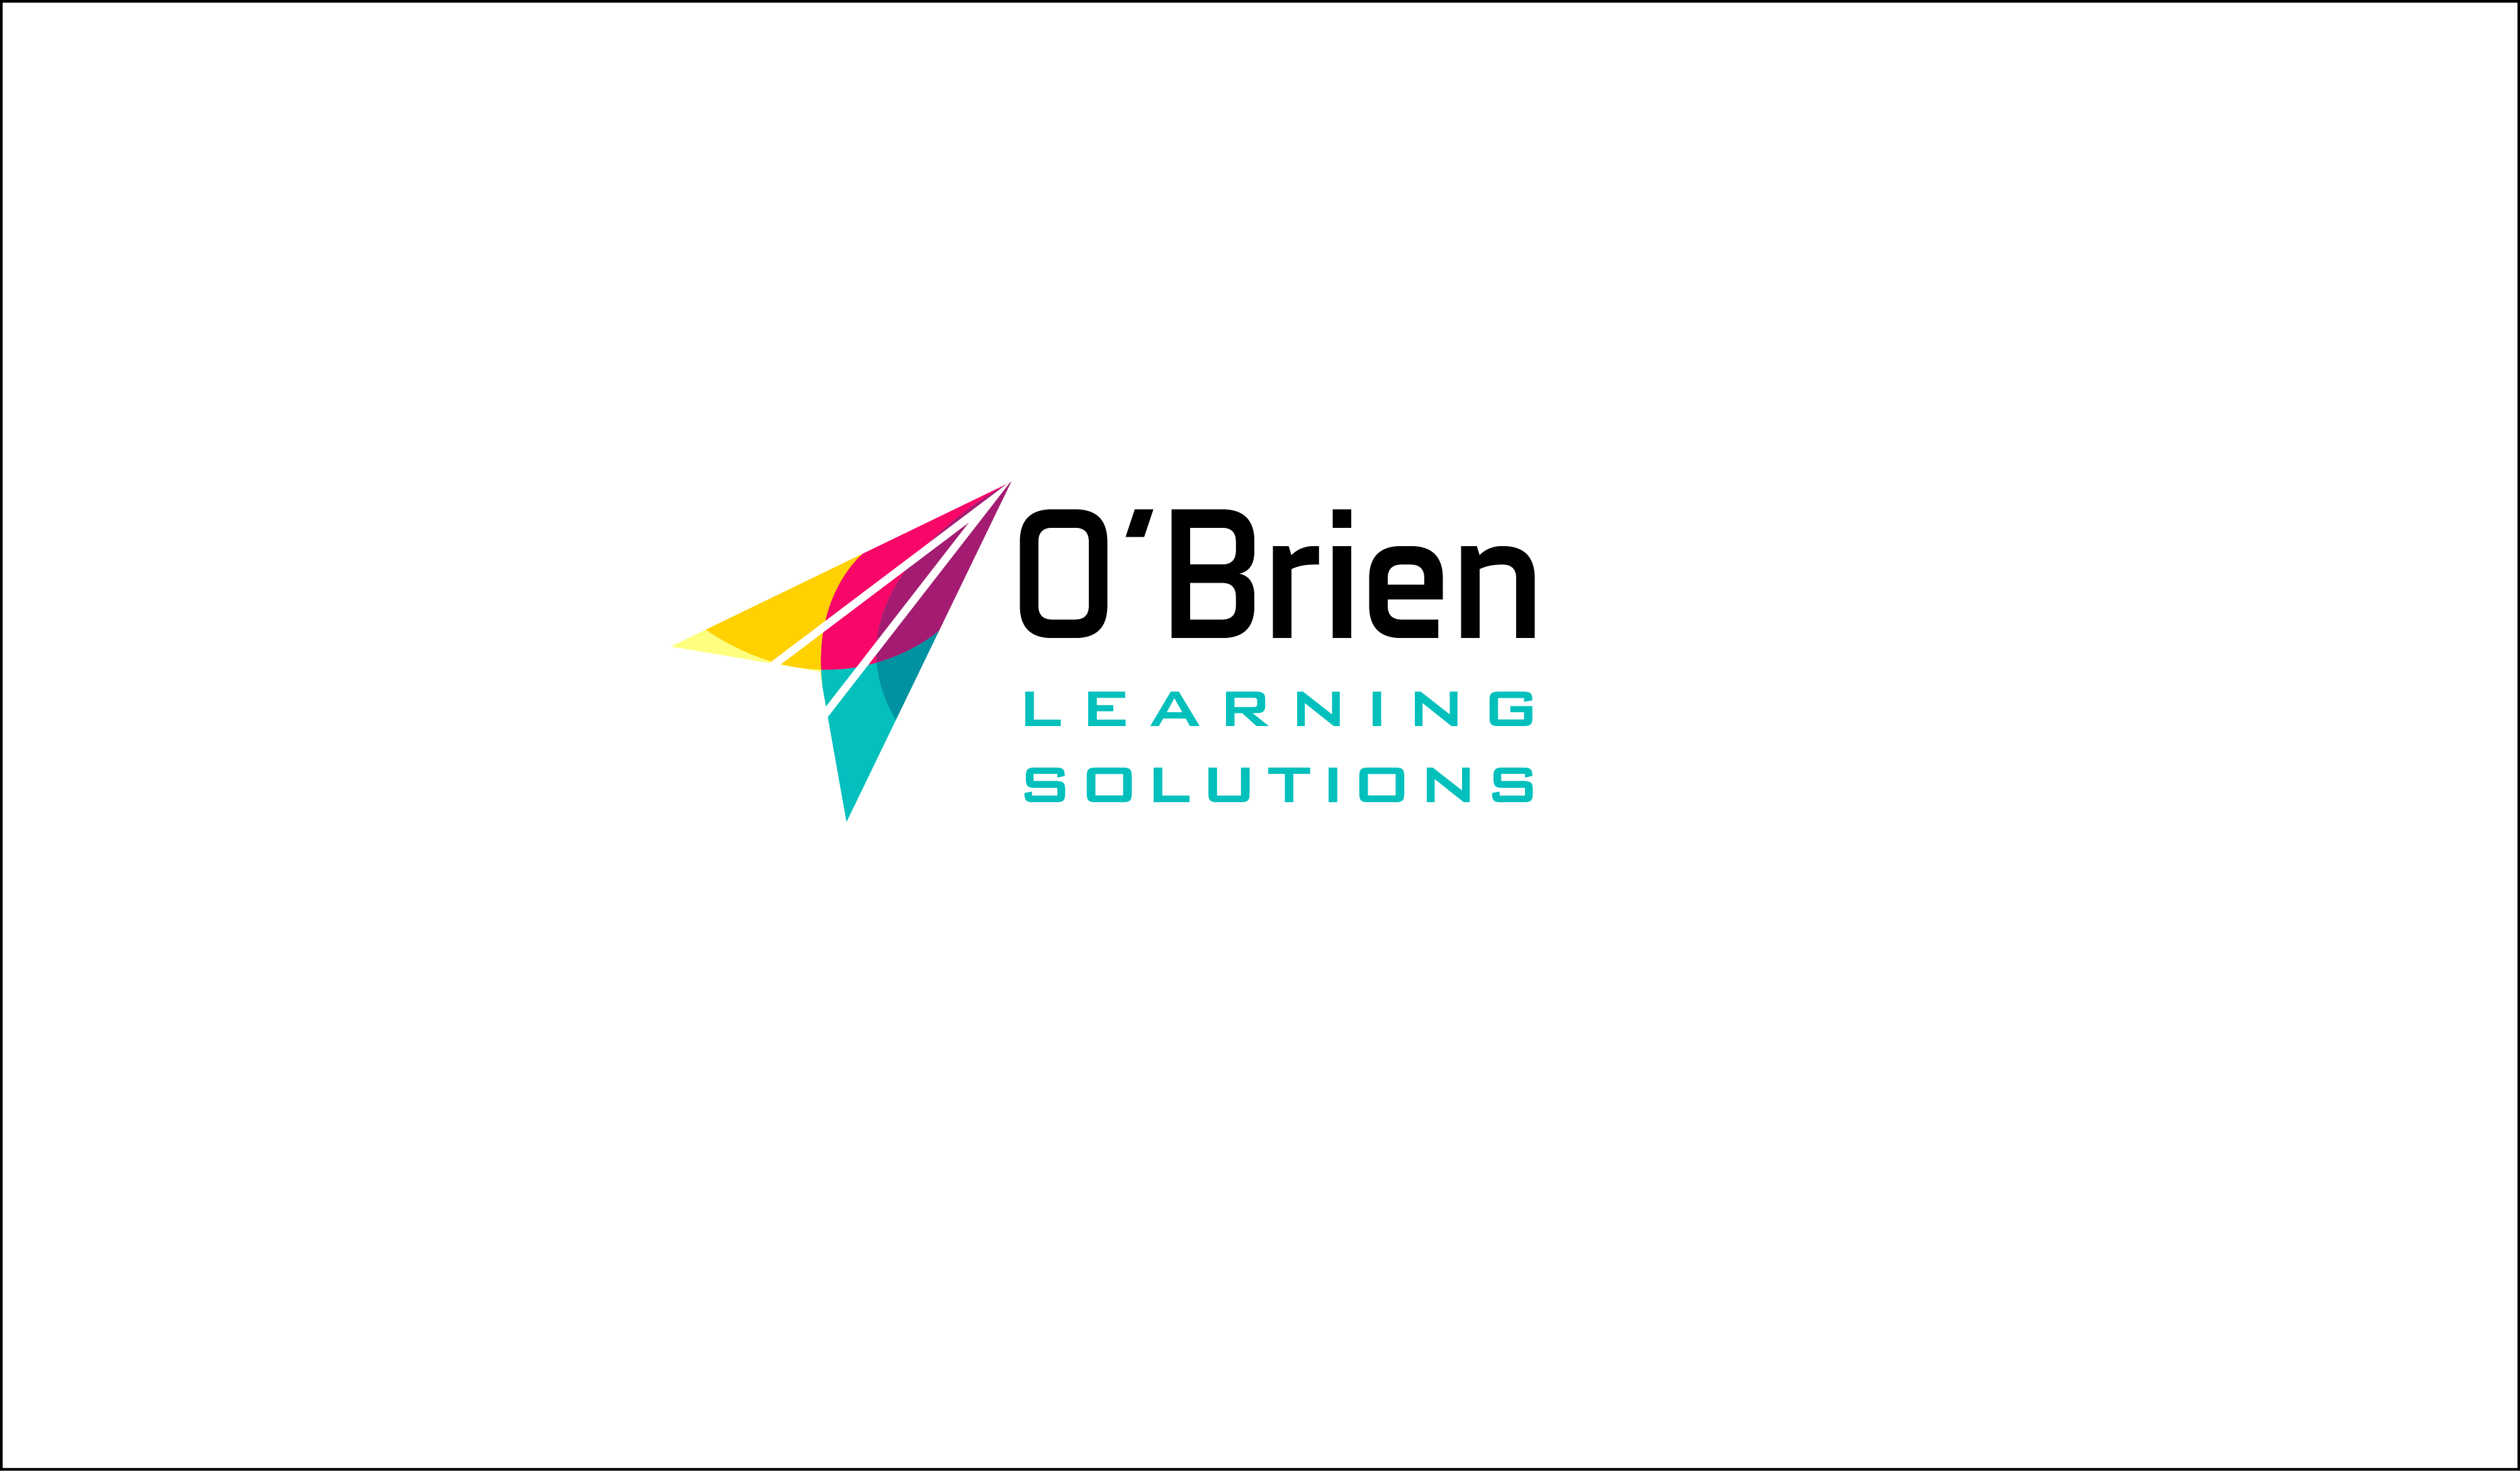 O Brien Learning Solutions